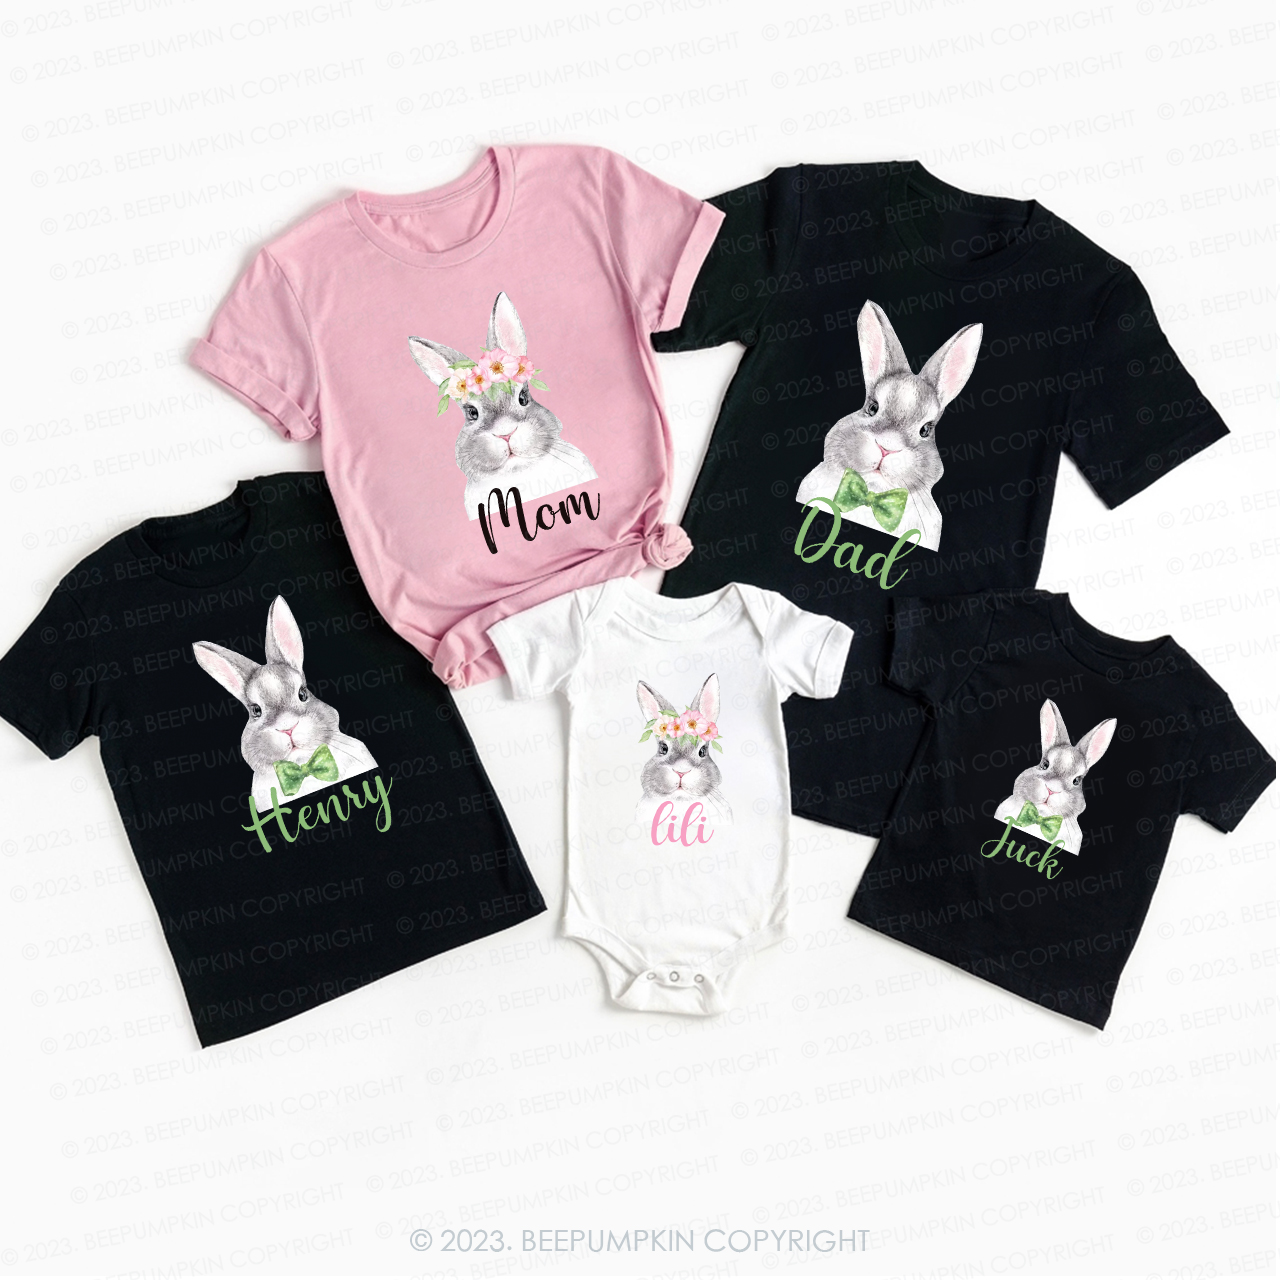 Personalized Easter Wreath Tie Bunny Photo Matching Shirts